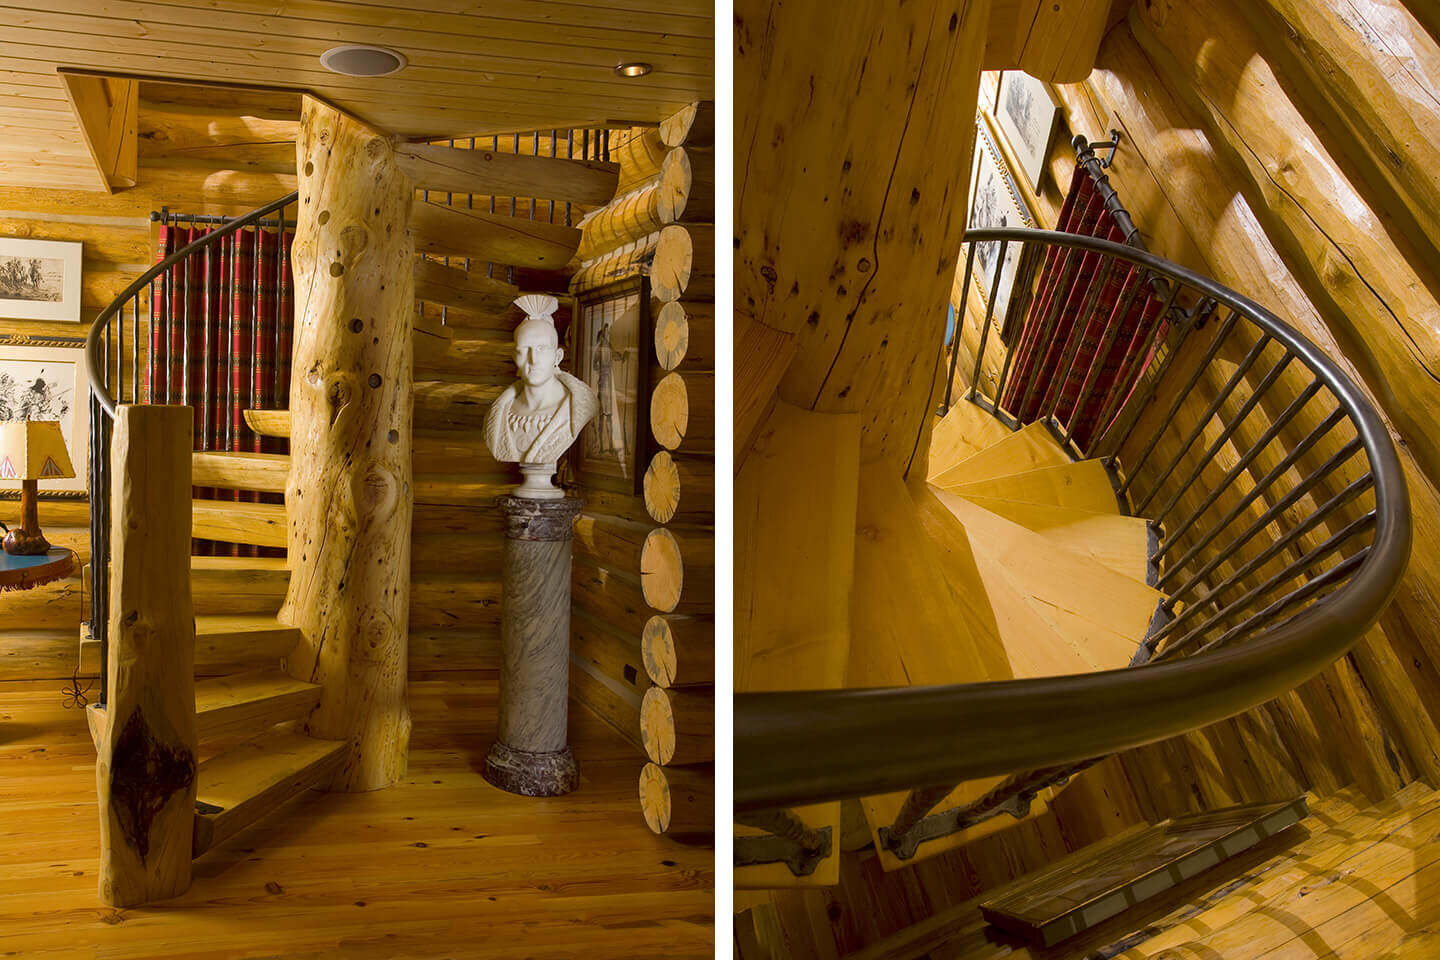 Log spiral staircase with Native American sculpture